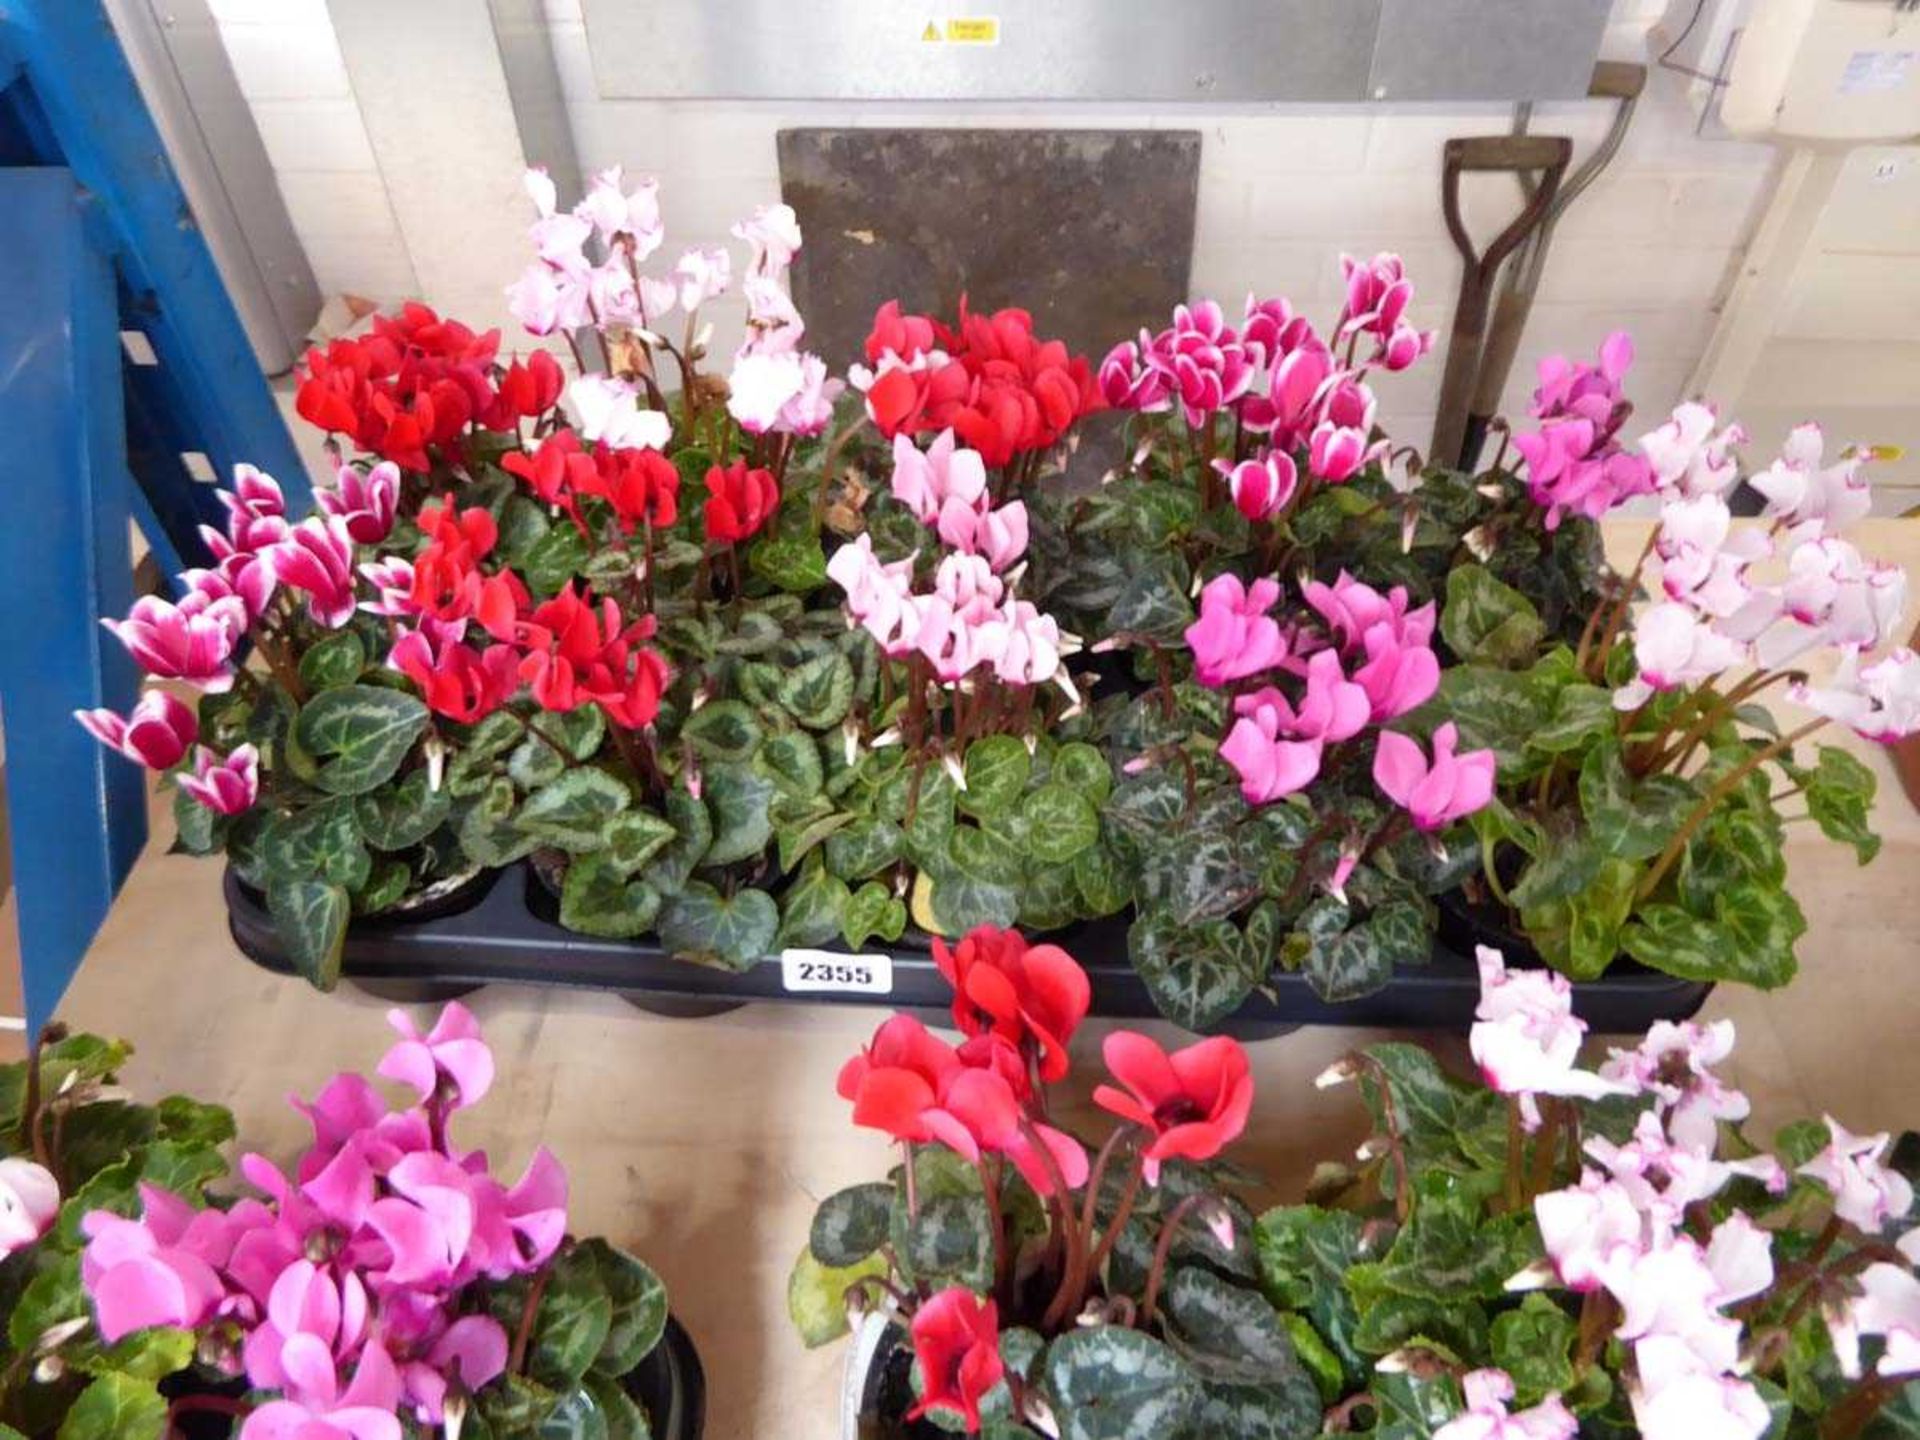 Tray containing 10 pots of mixed coloured cyclamen